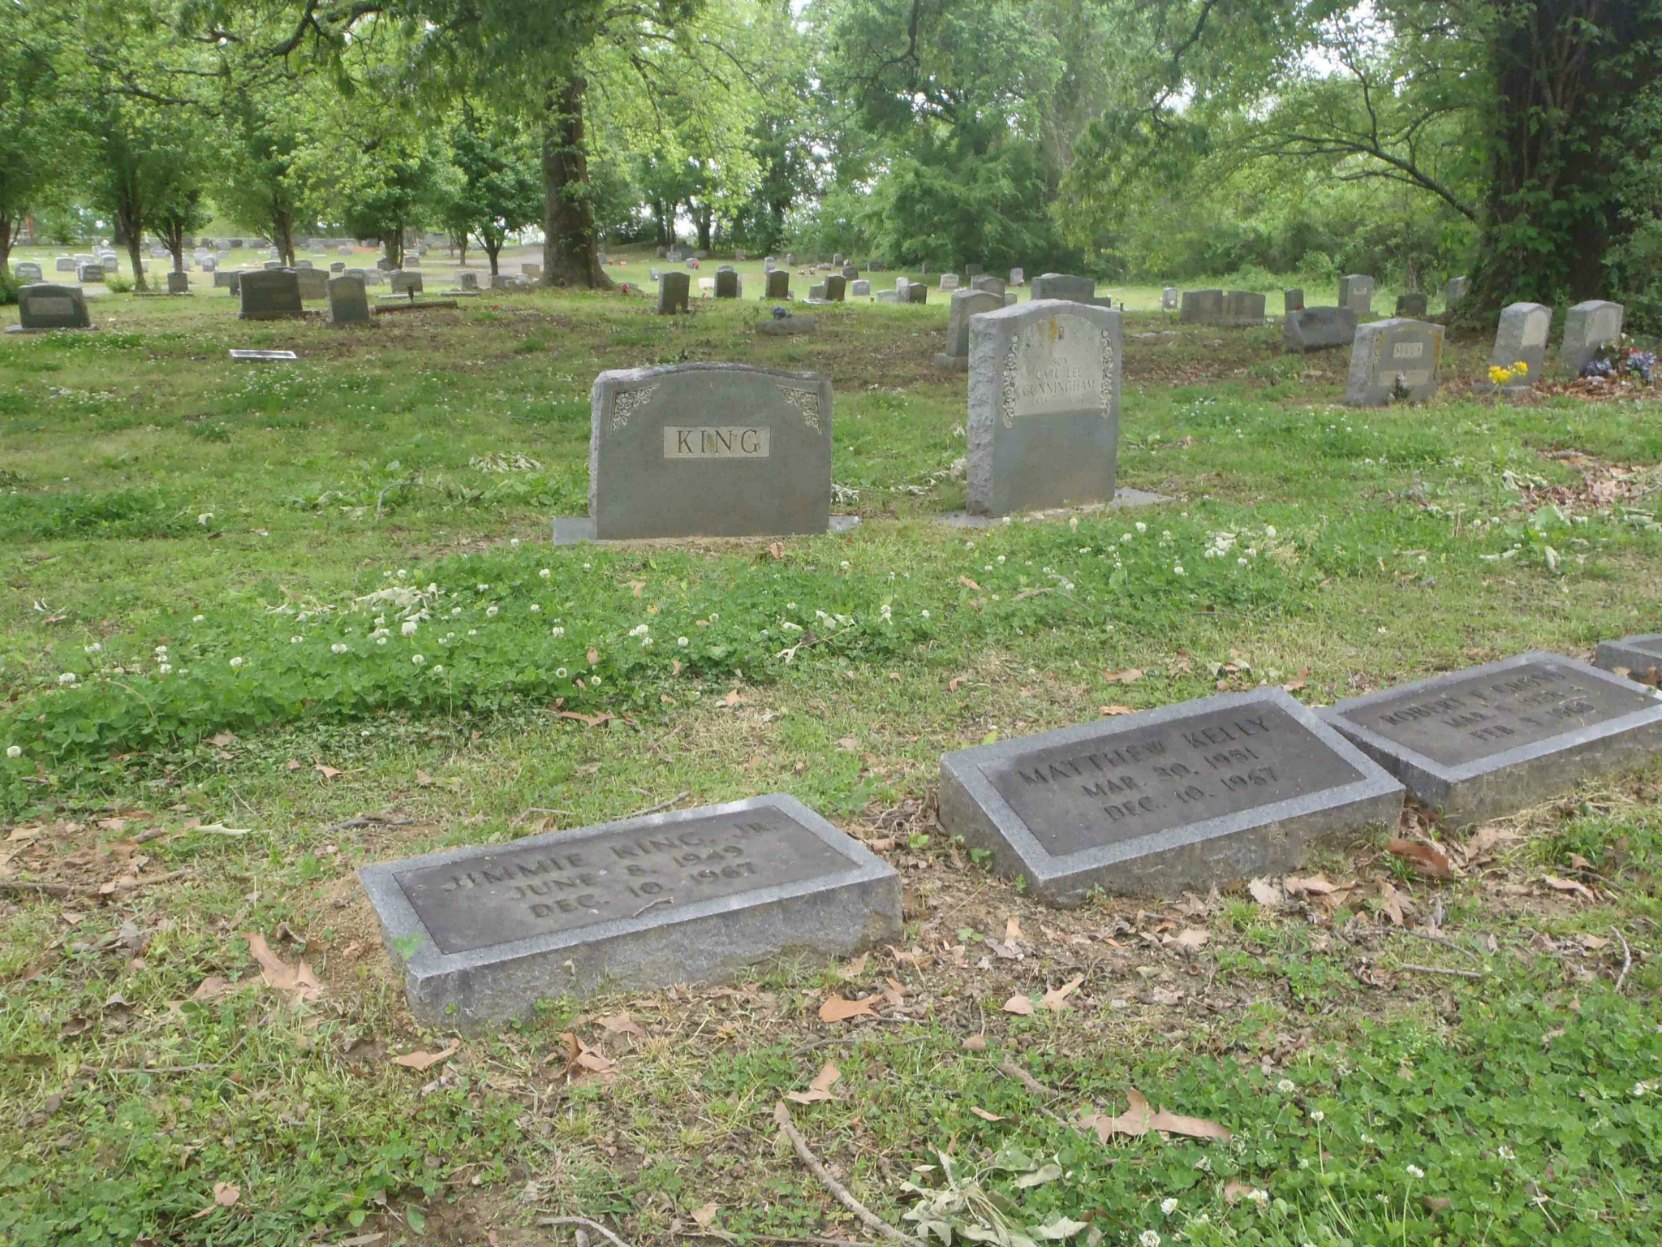 The graves of Carl Lee Cunningham (background) Jimmy King and Matthew Kelly (foreground), New Park Cemetery, Memphis, Tennessee